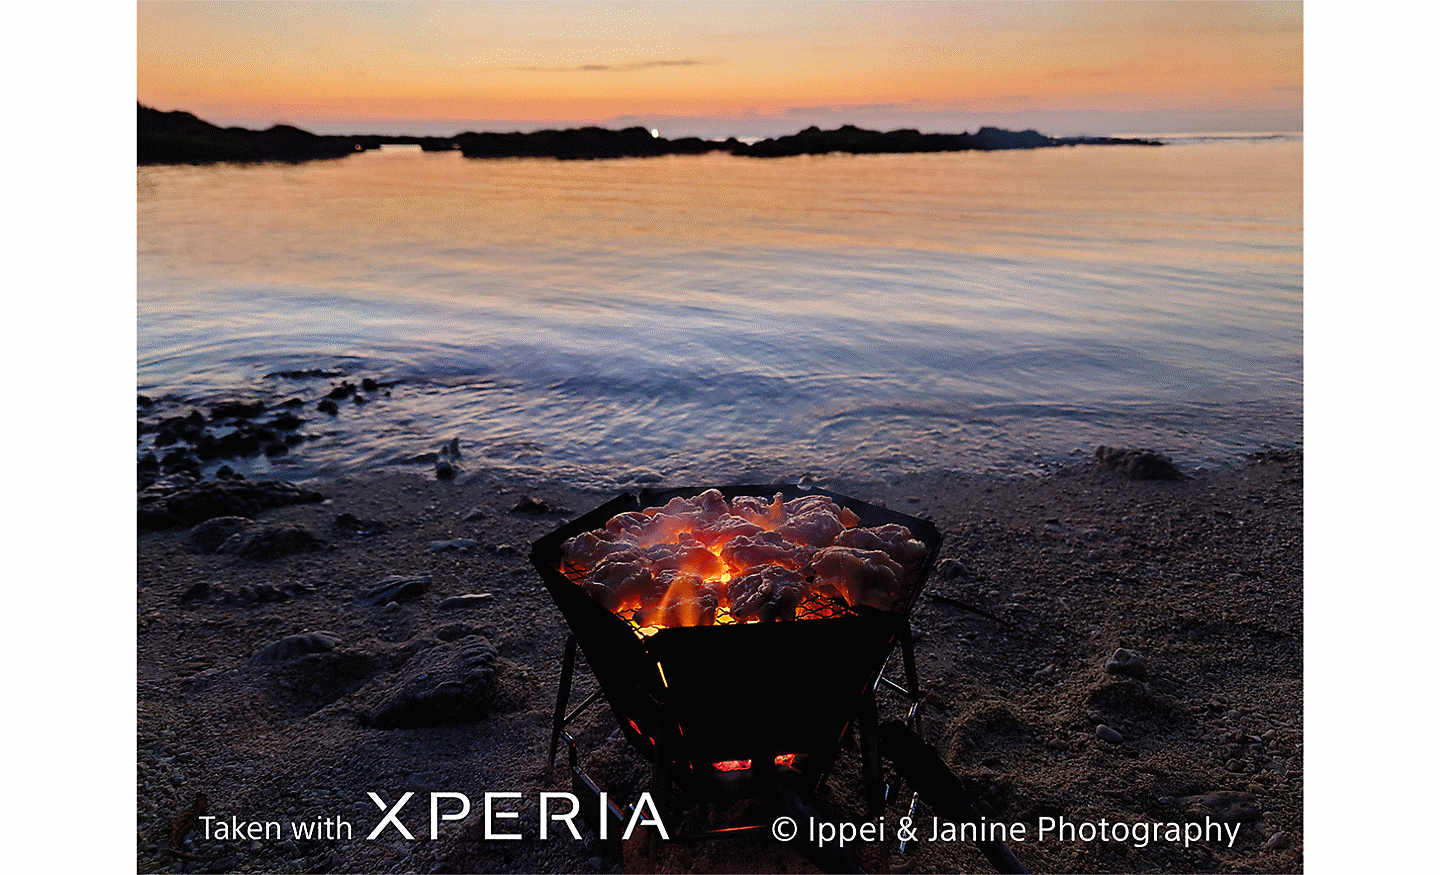 A glowing firepit on a beach, overlooking water at sunset. Text reads "Taken with XPERIA ©Ippei & Janine Photography".